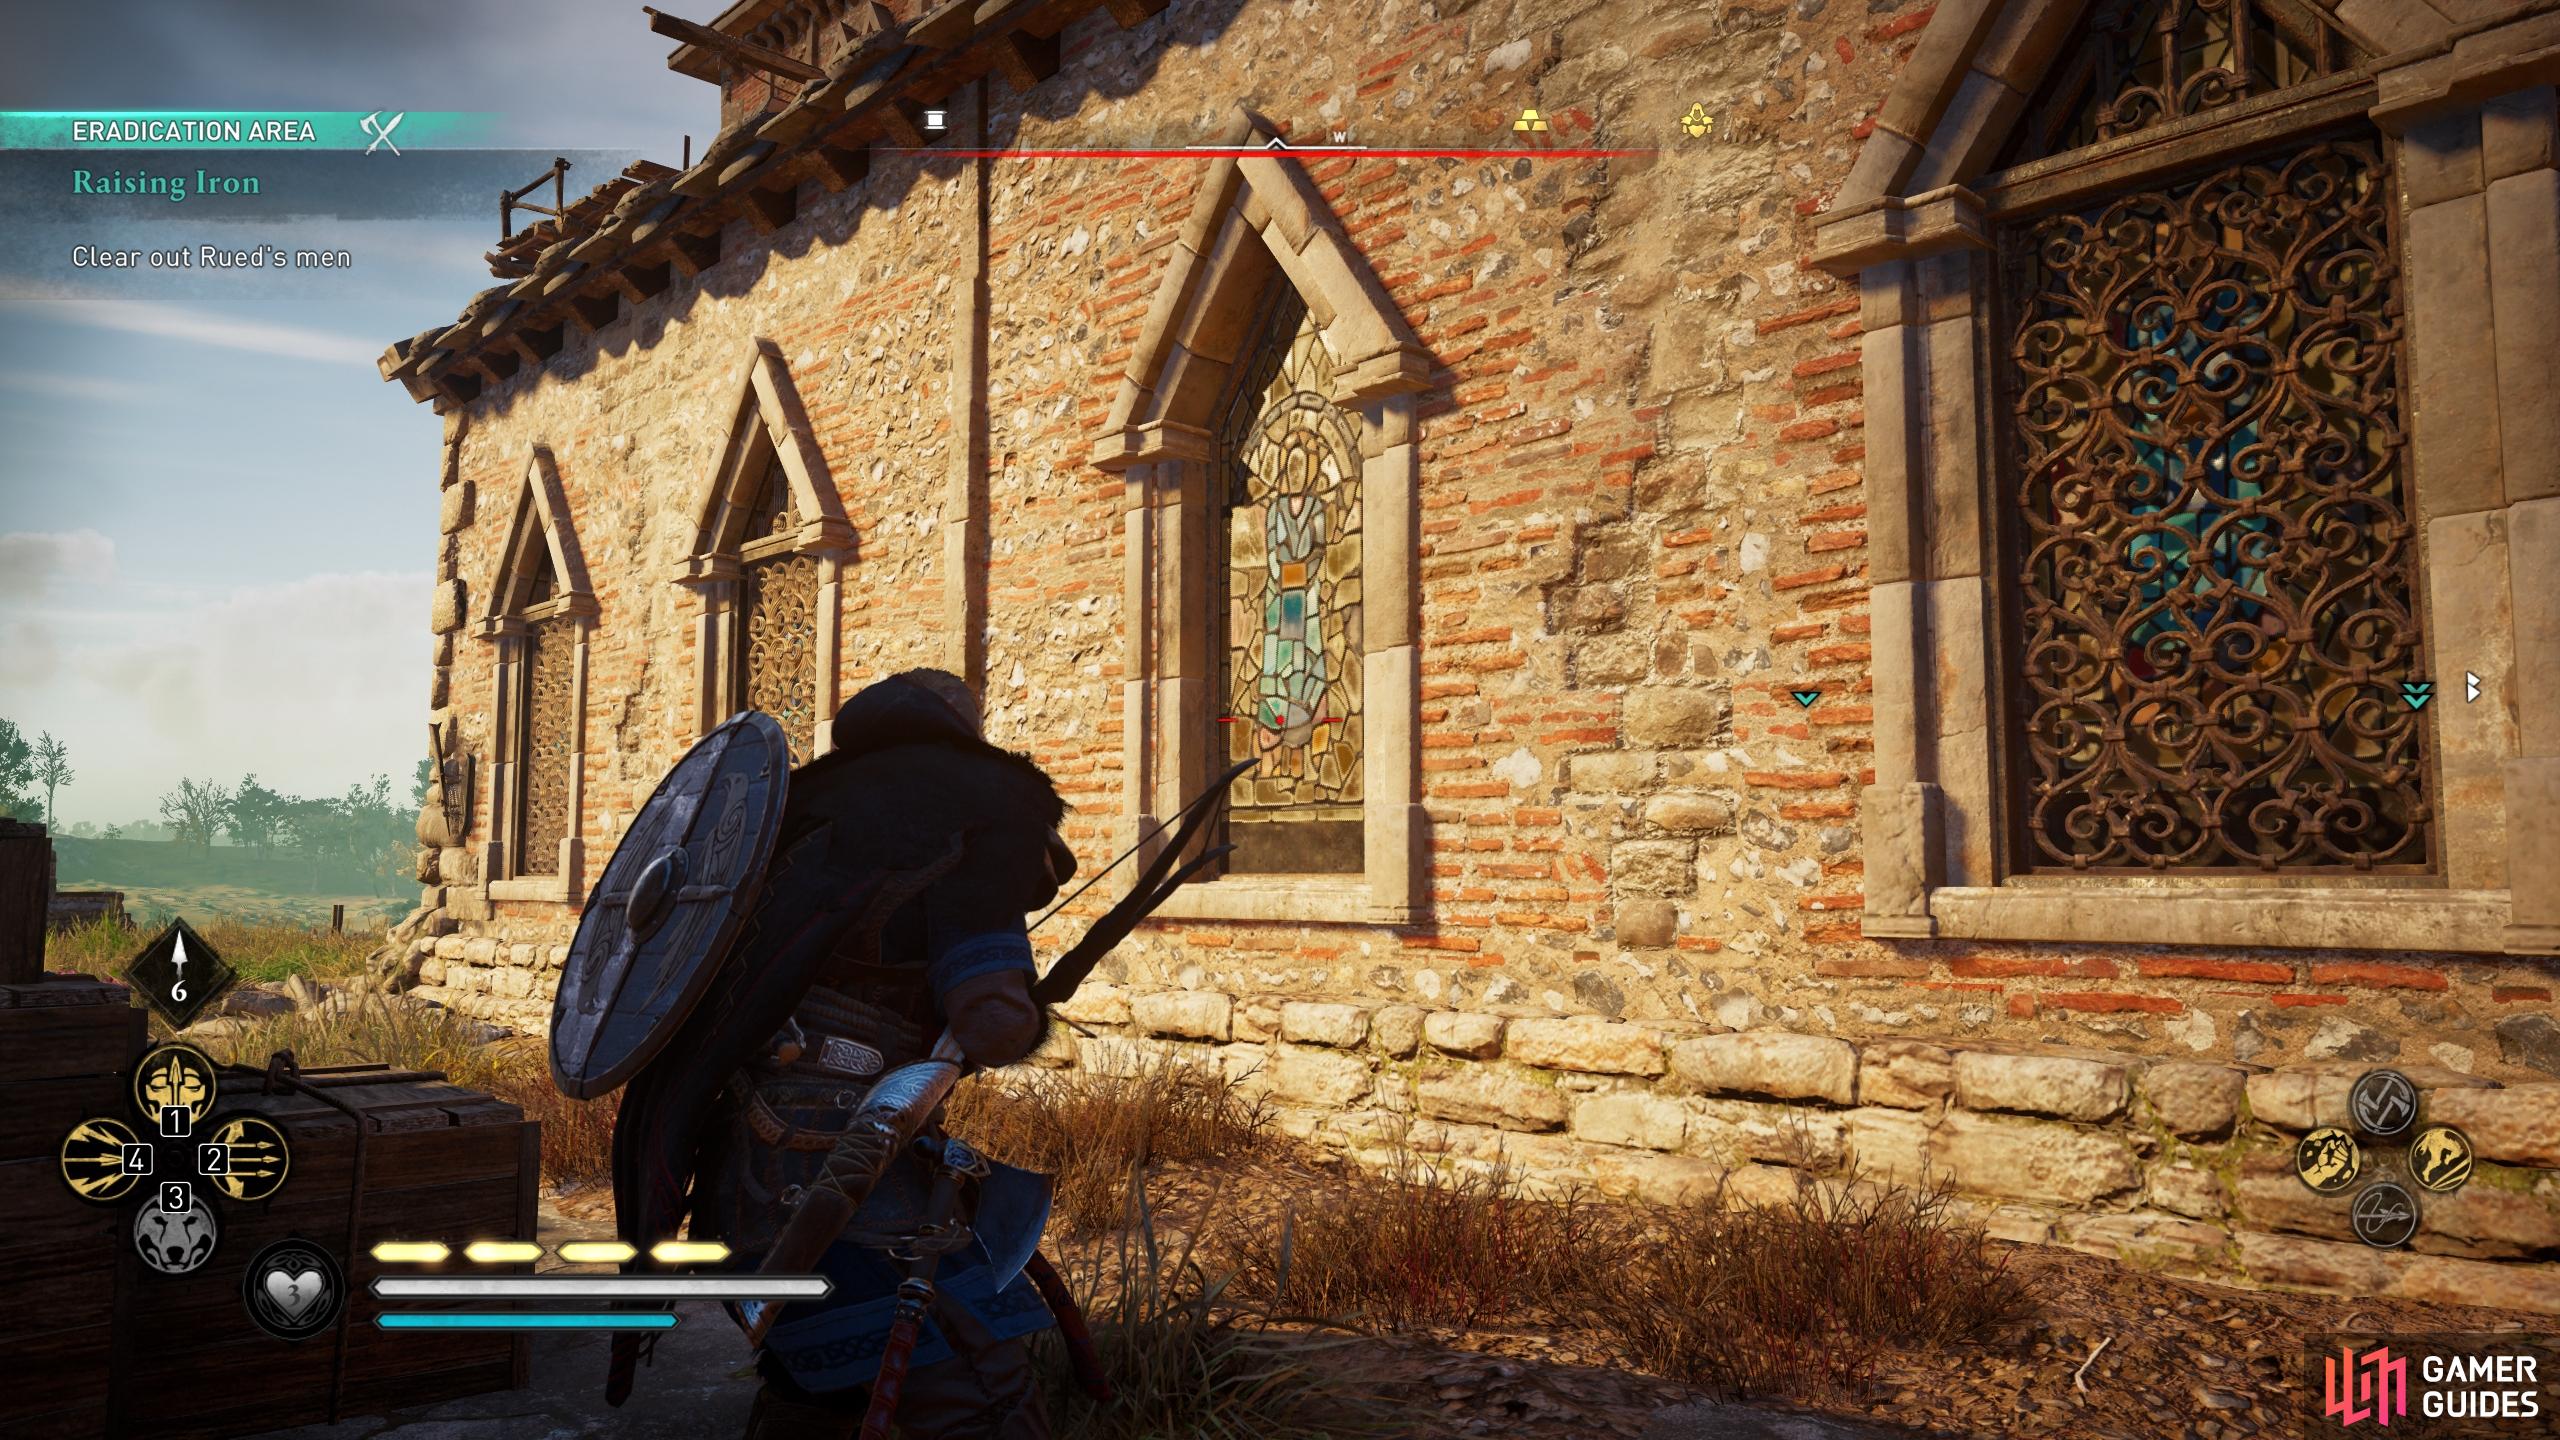 You can enter the church alone through a window on the ground floor.